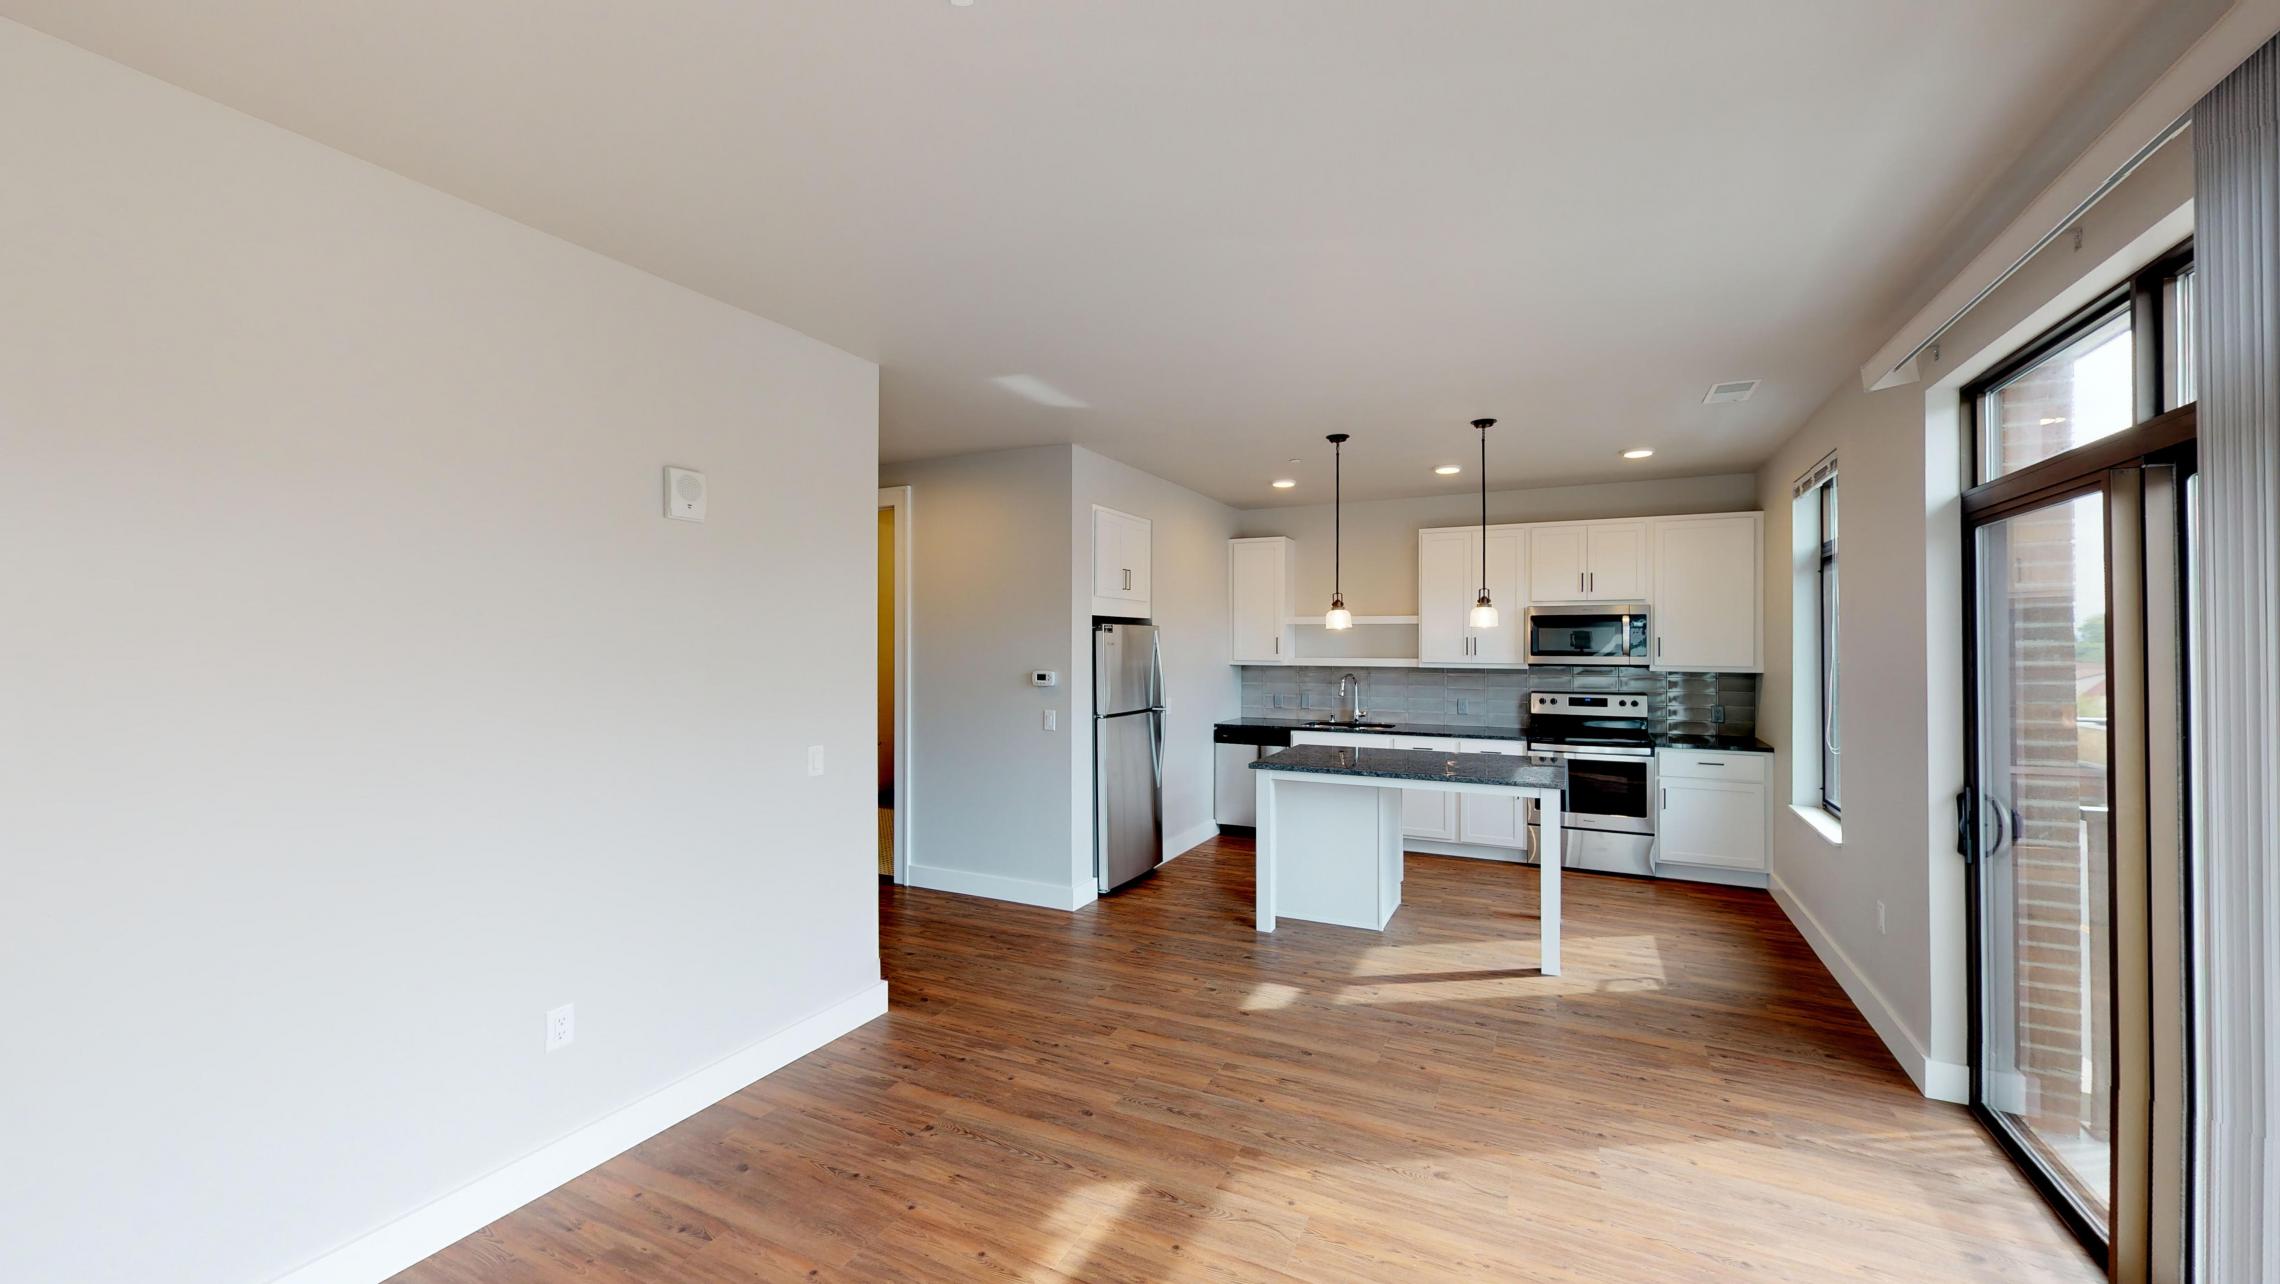 1722-Monroe-Apartment-211-One-Bedroom-Bathroom-Modern-Design-Upscale-Terrace-Views-Madison-Lifestyle-Fitness-Lounge-Balcony-Living-Kithcen-Cats-Dogs